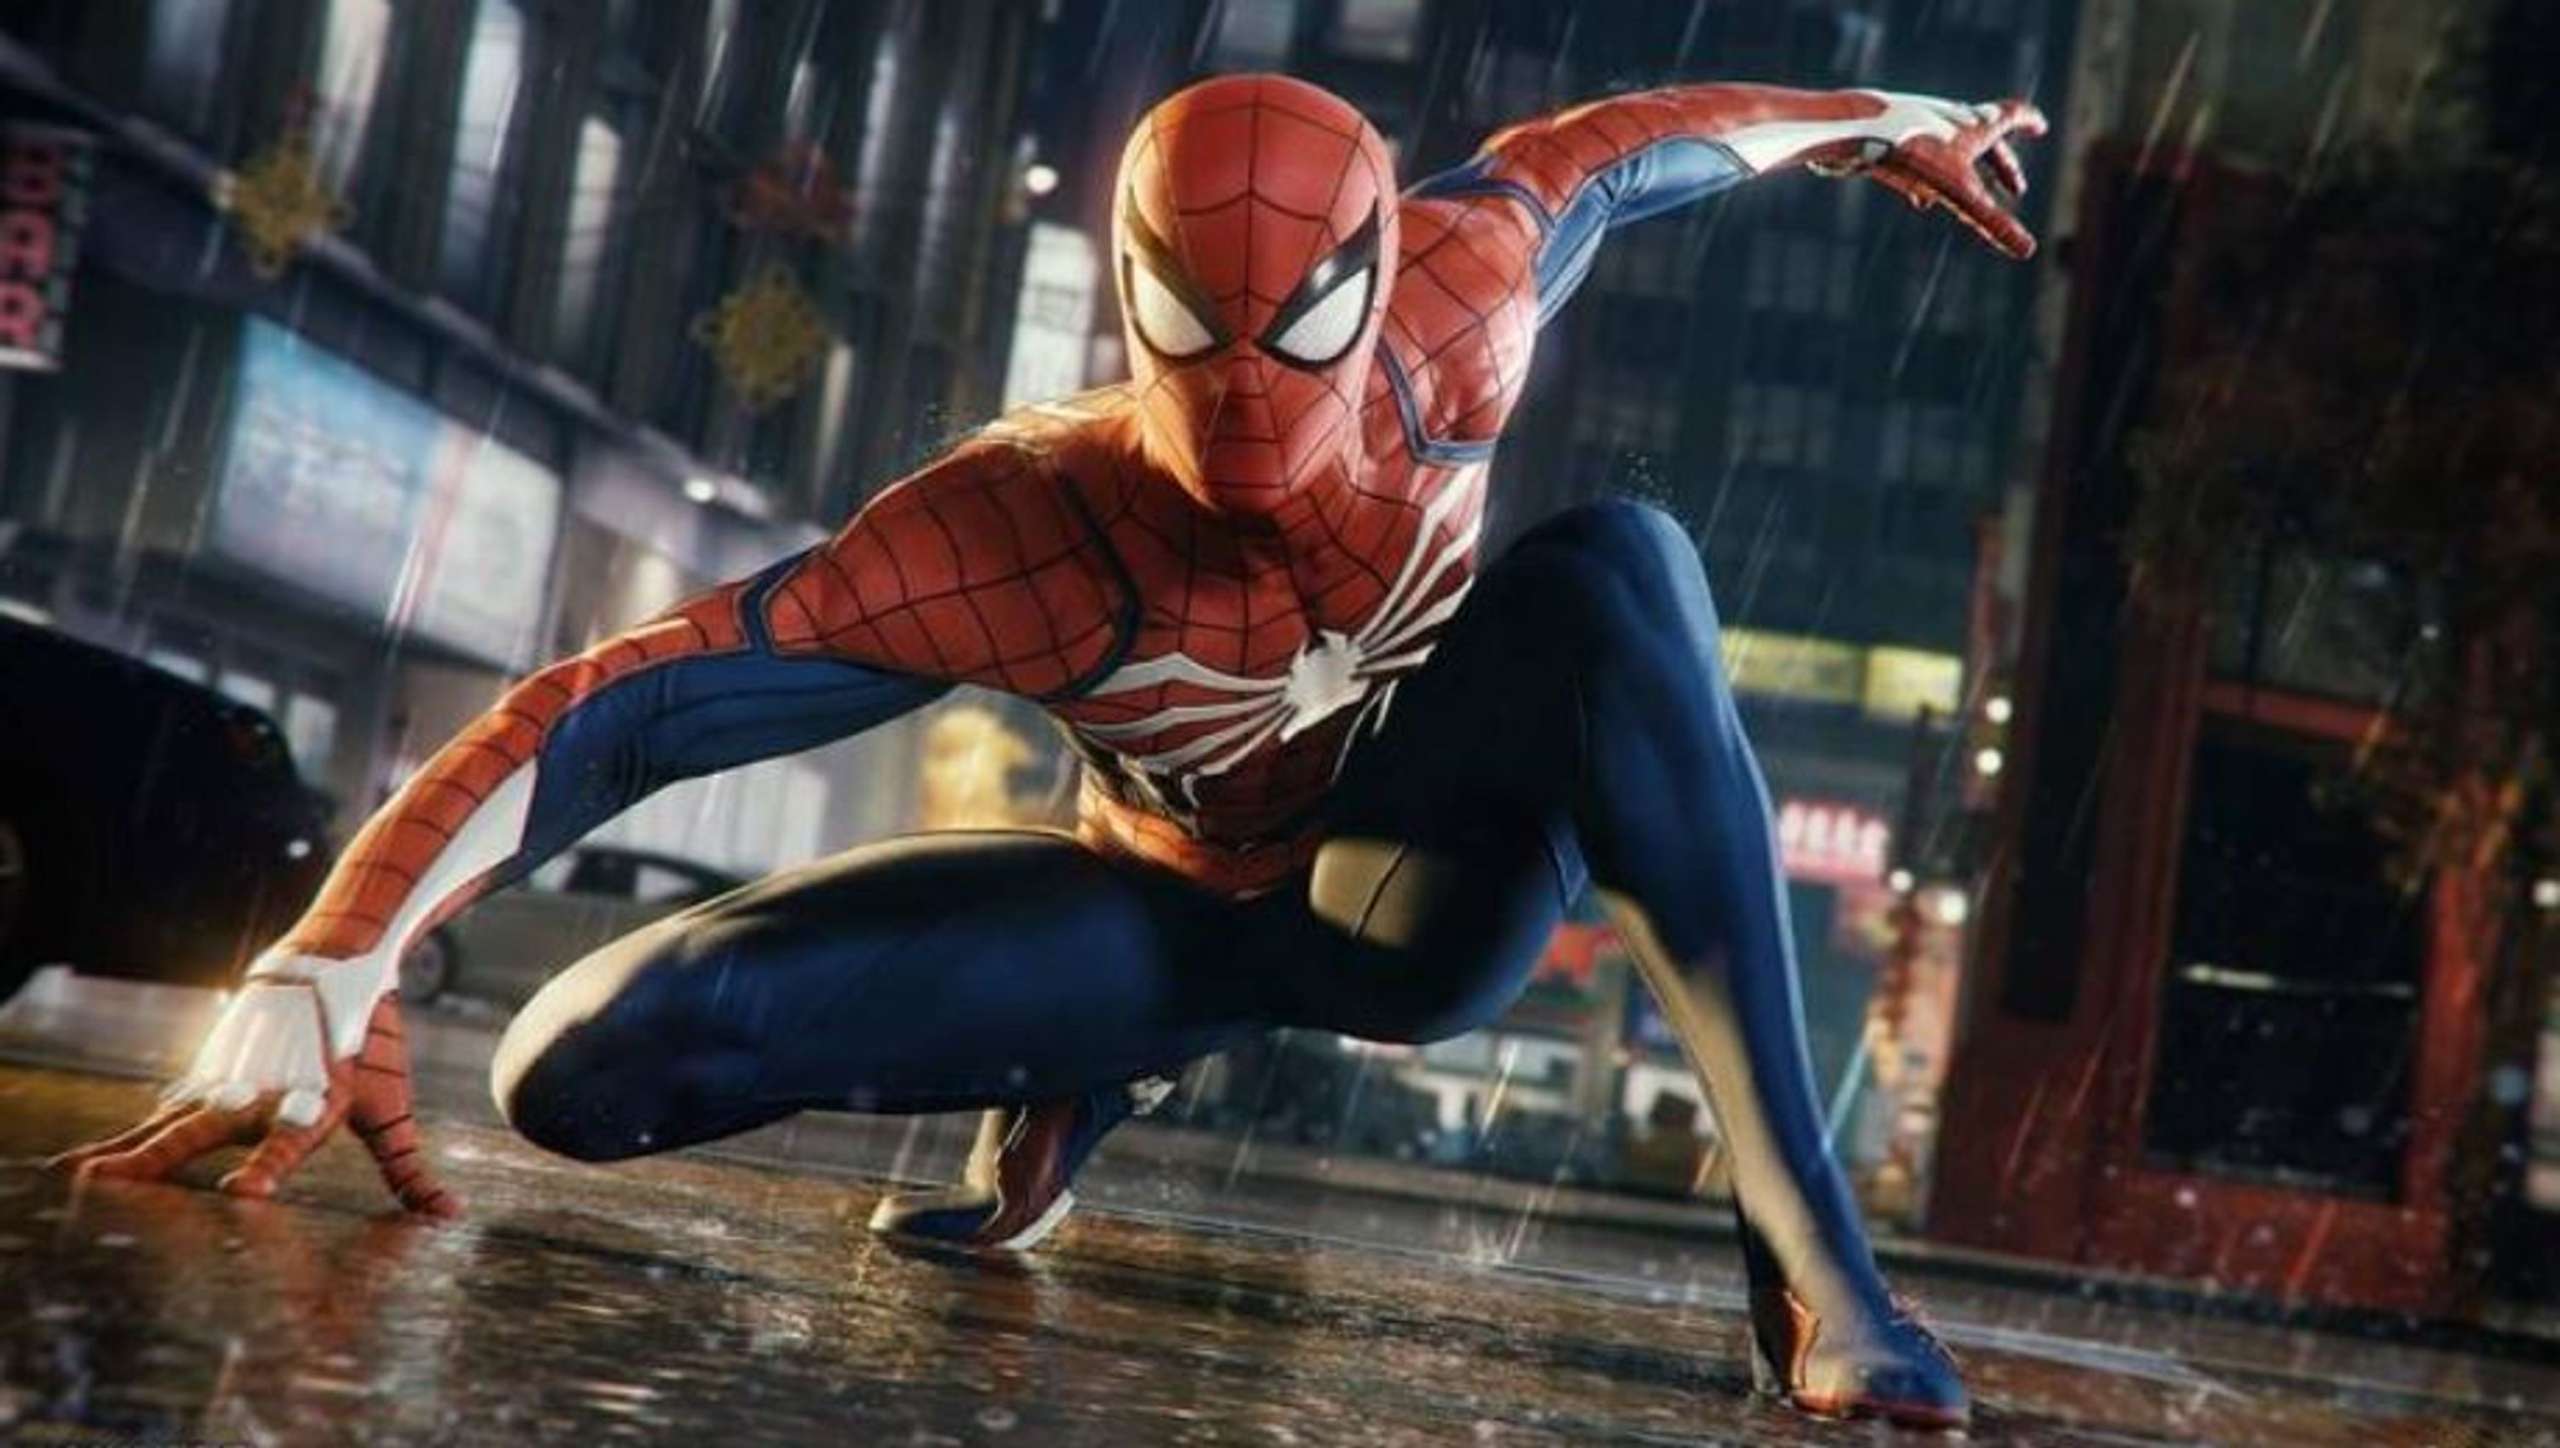 The PC Features For Marvel’s Spider-Man Remastered Have Been Officially Endorsed By Sony Interactive Entertainment In Advance Of Its Release Next Month